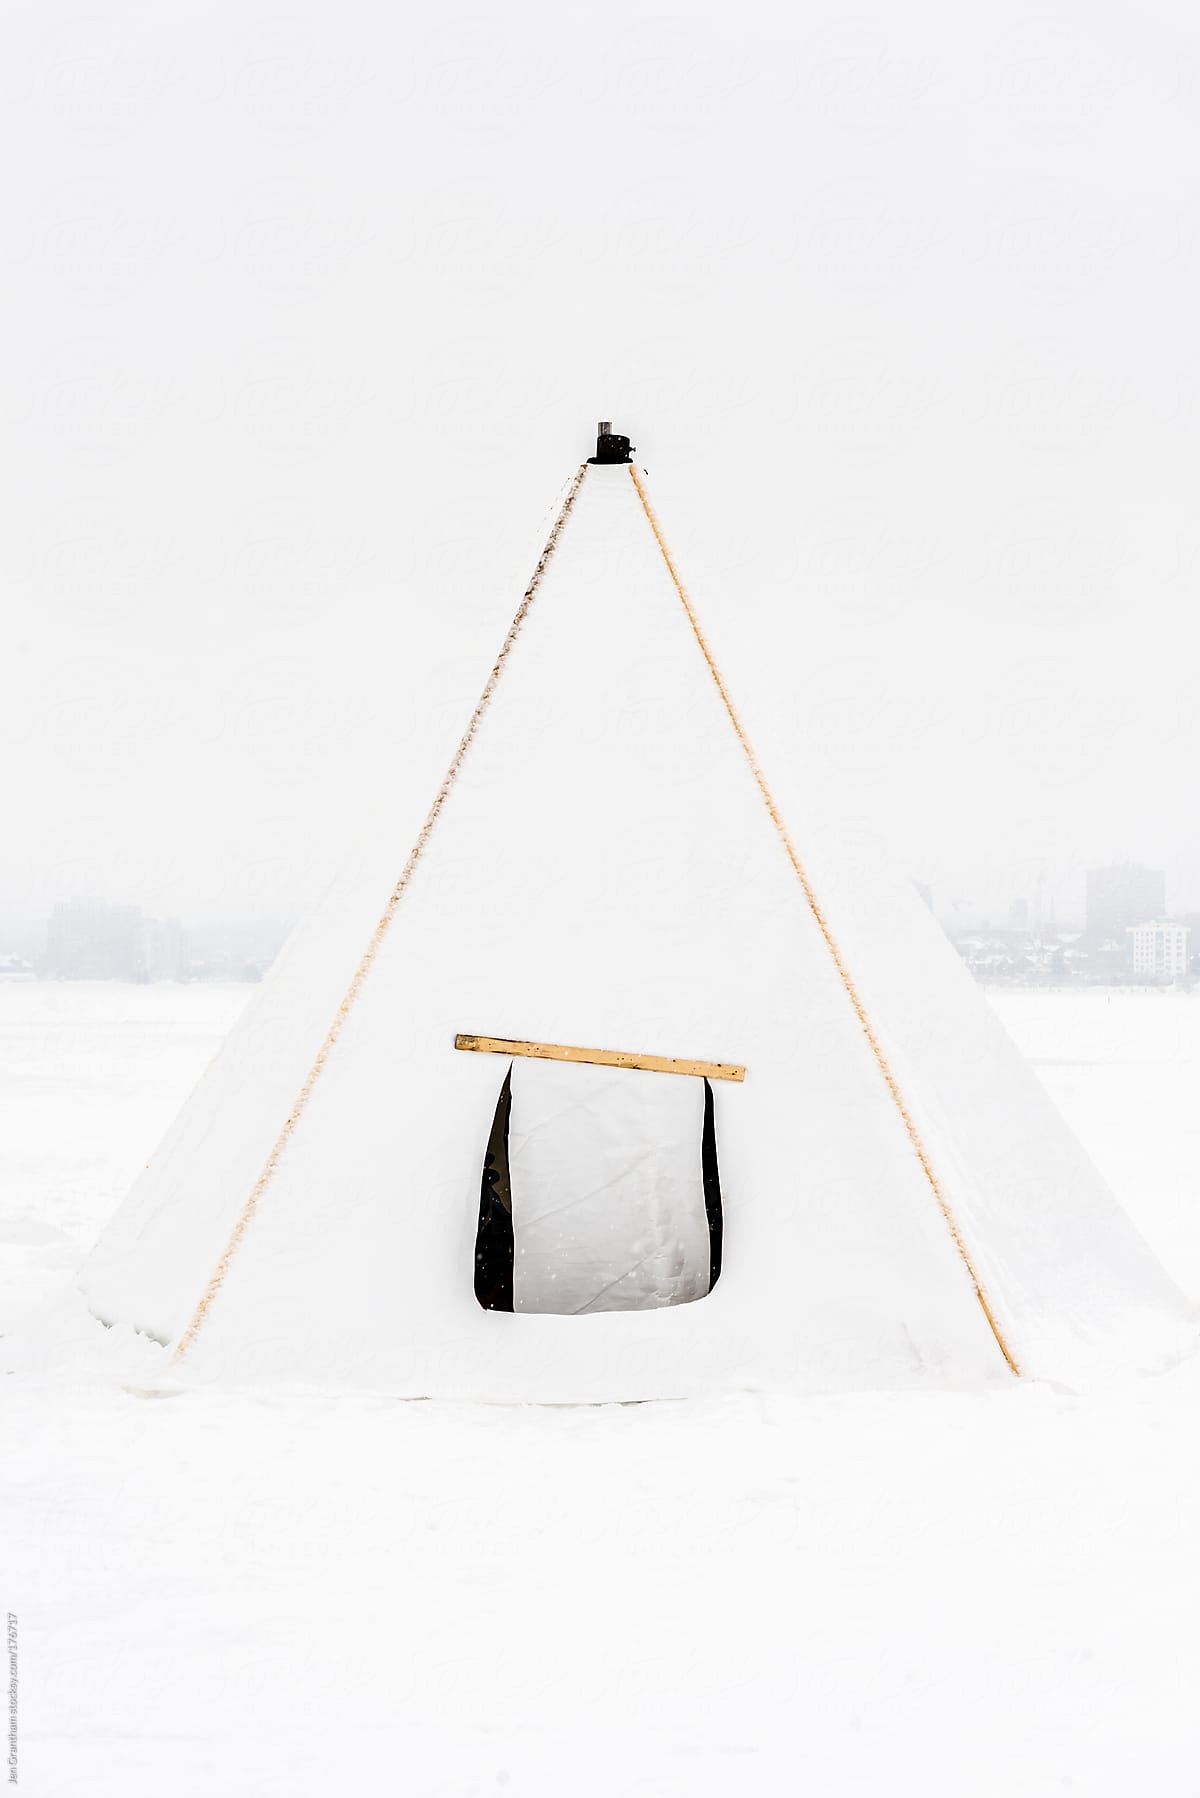 Tipi for ice fishing